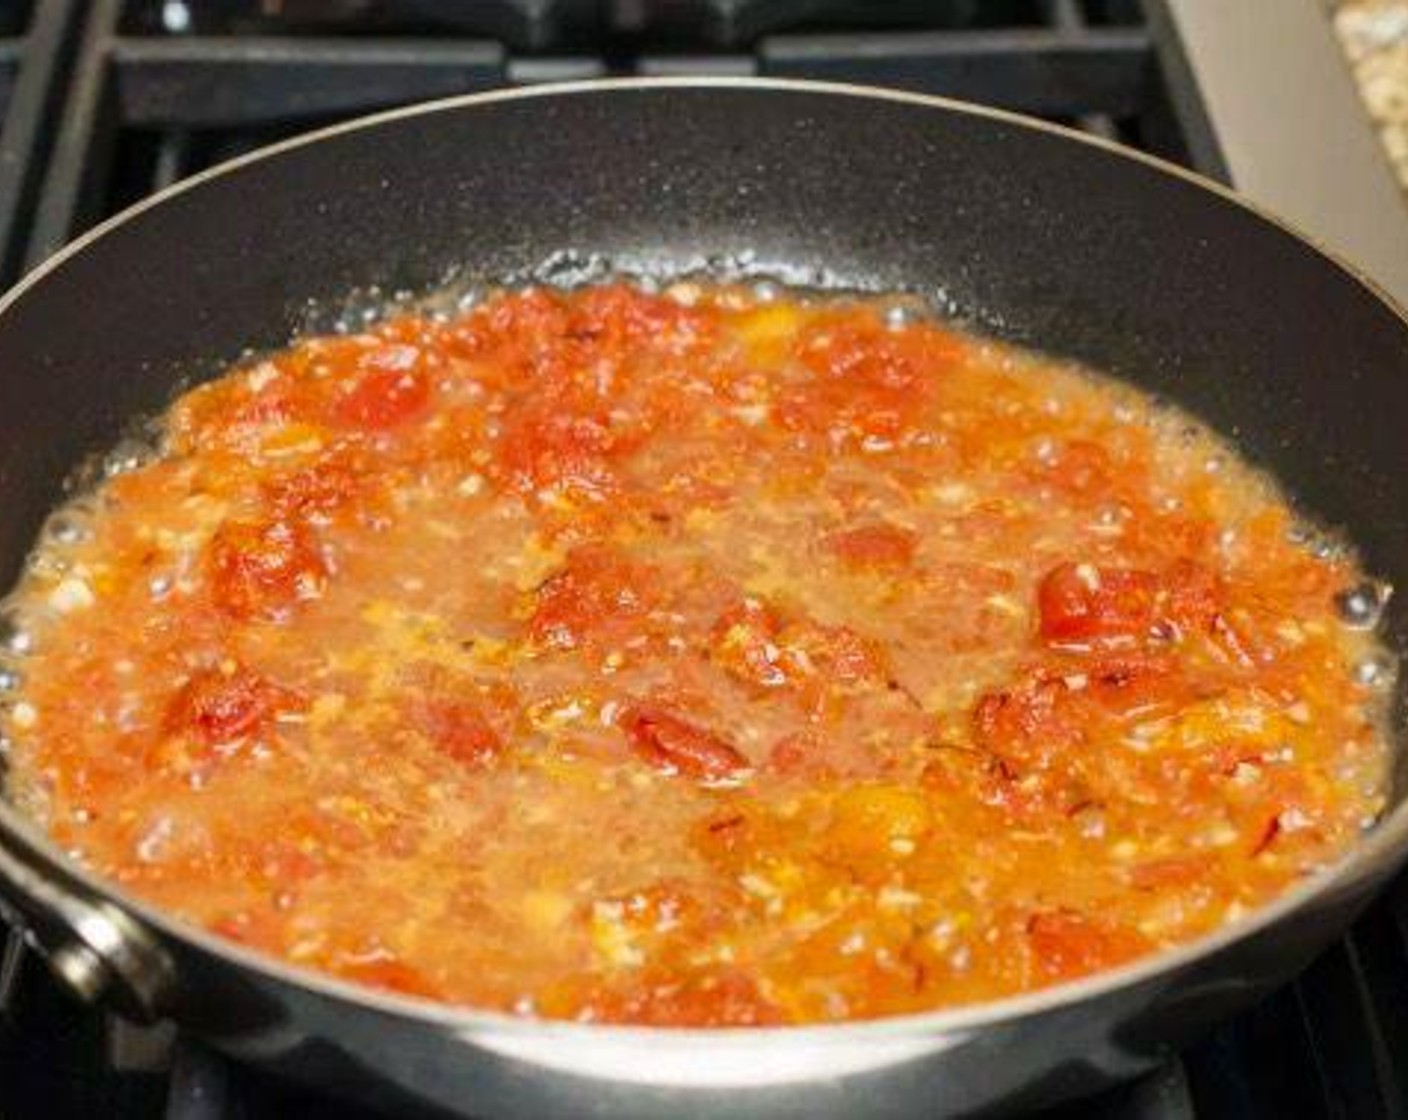 step 3 Crush Canned Diced Tomatoes (1 cup) with your hand and add to pan along with Aleppo Chili Flakes (1 pinch) and Saffron Threads (1 pinch). Simmer gently to reduce for 4 minutes.